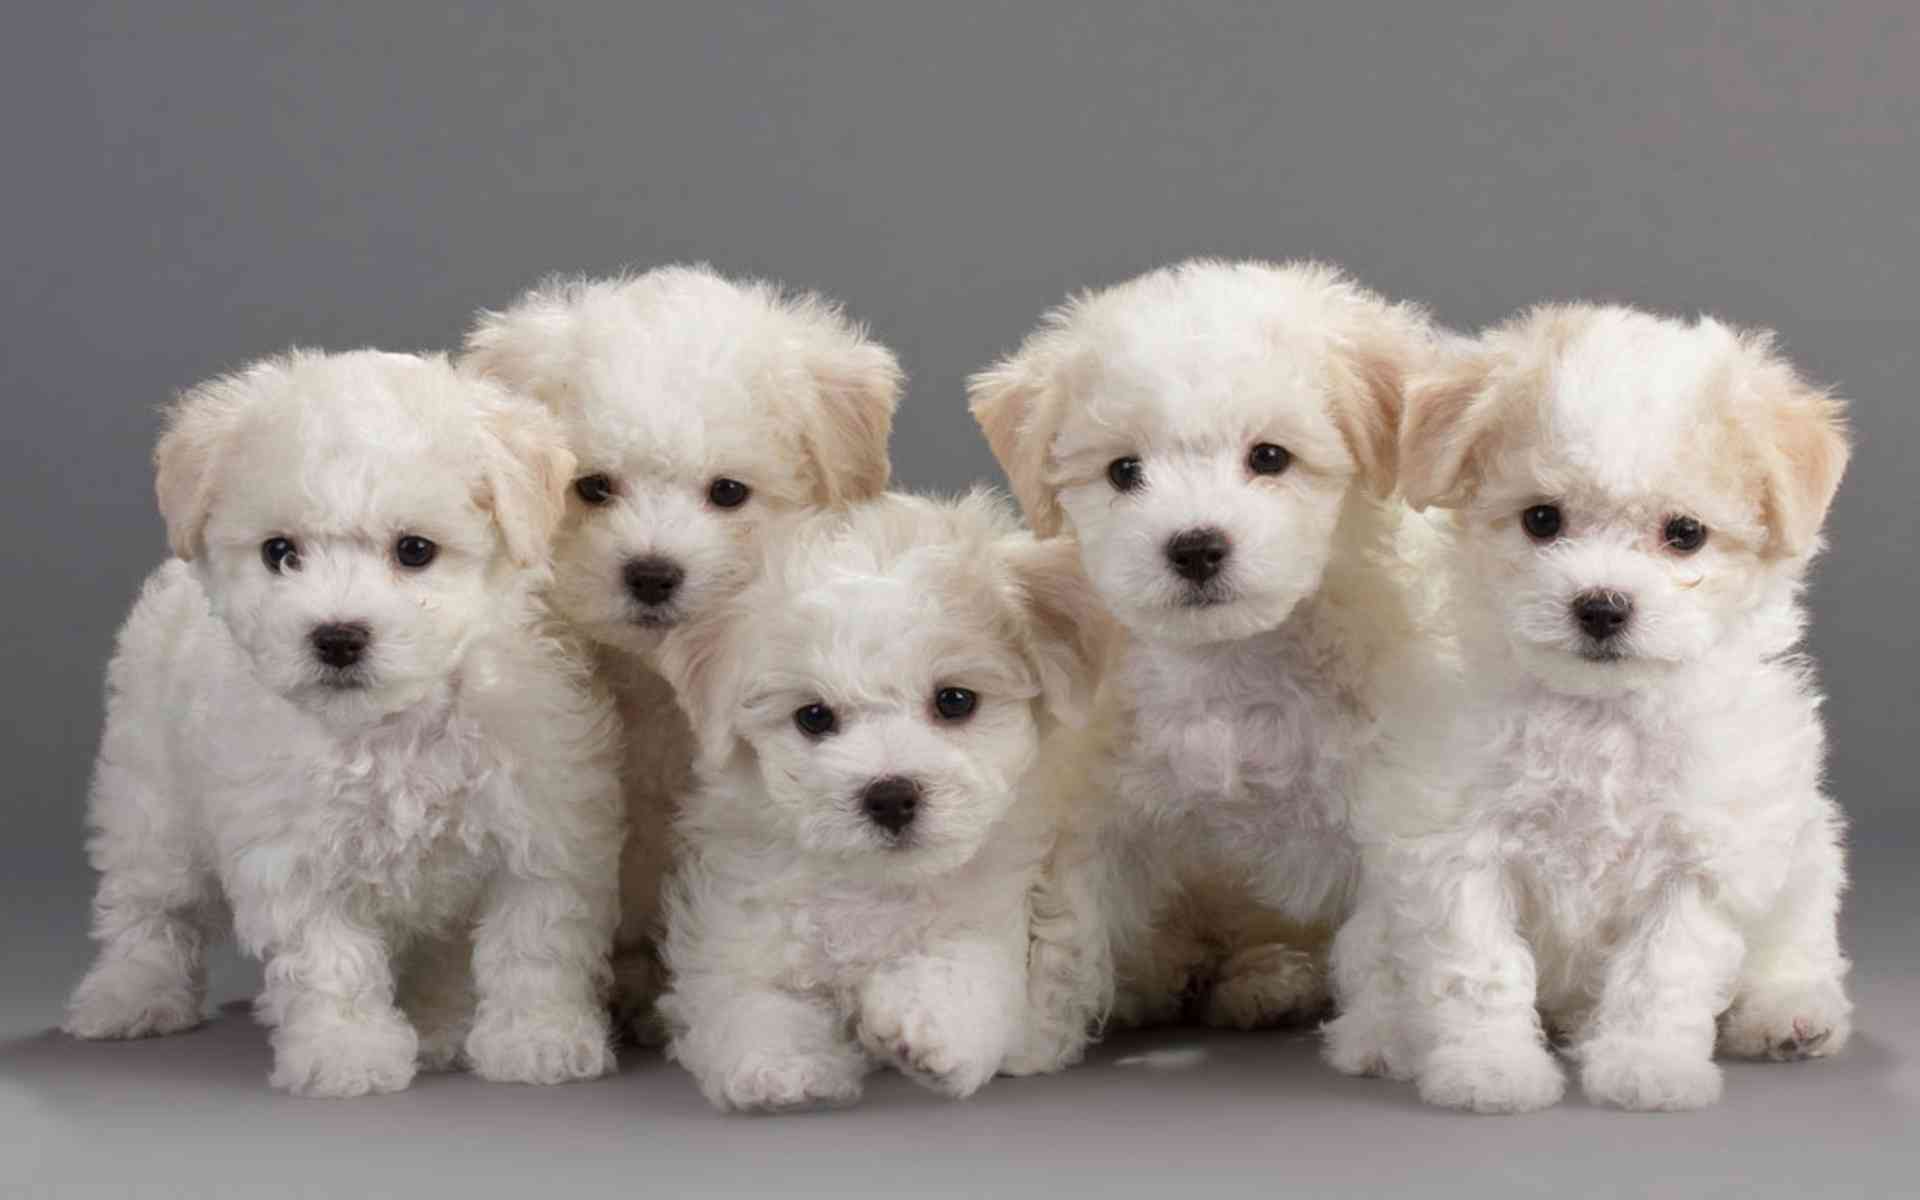 Family breed Bichon Frise on a gray background wallpaper